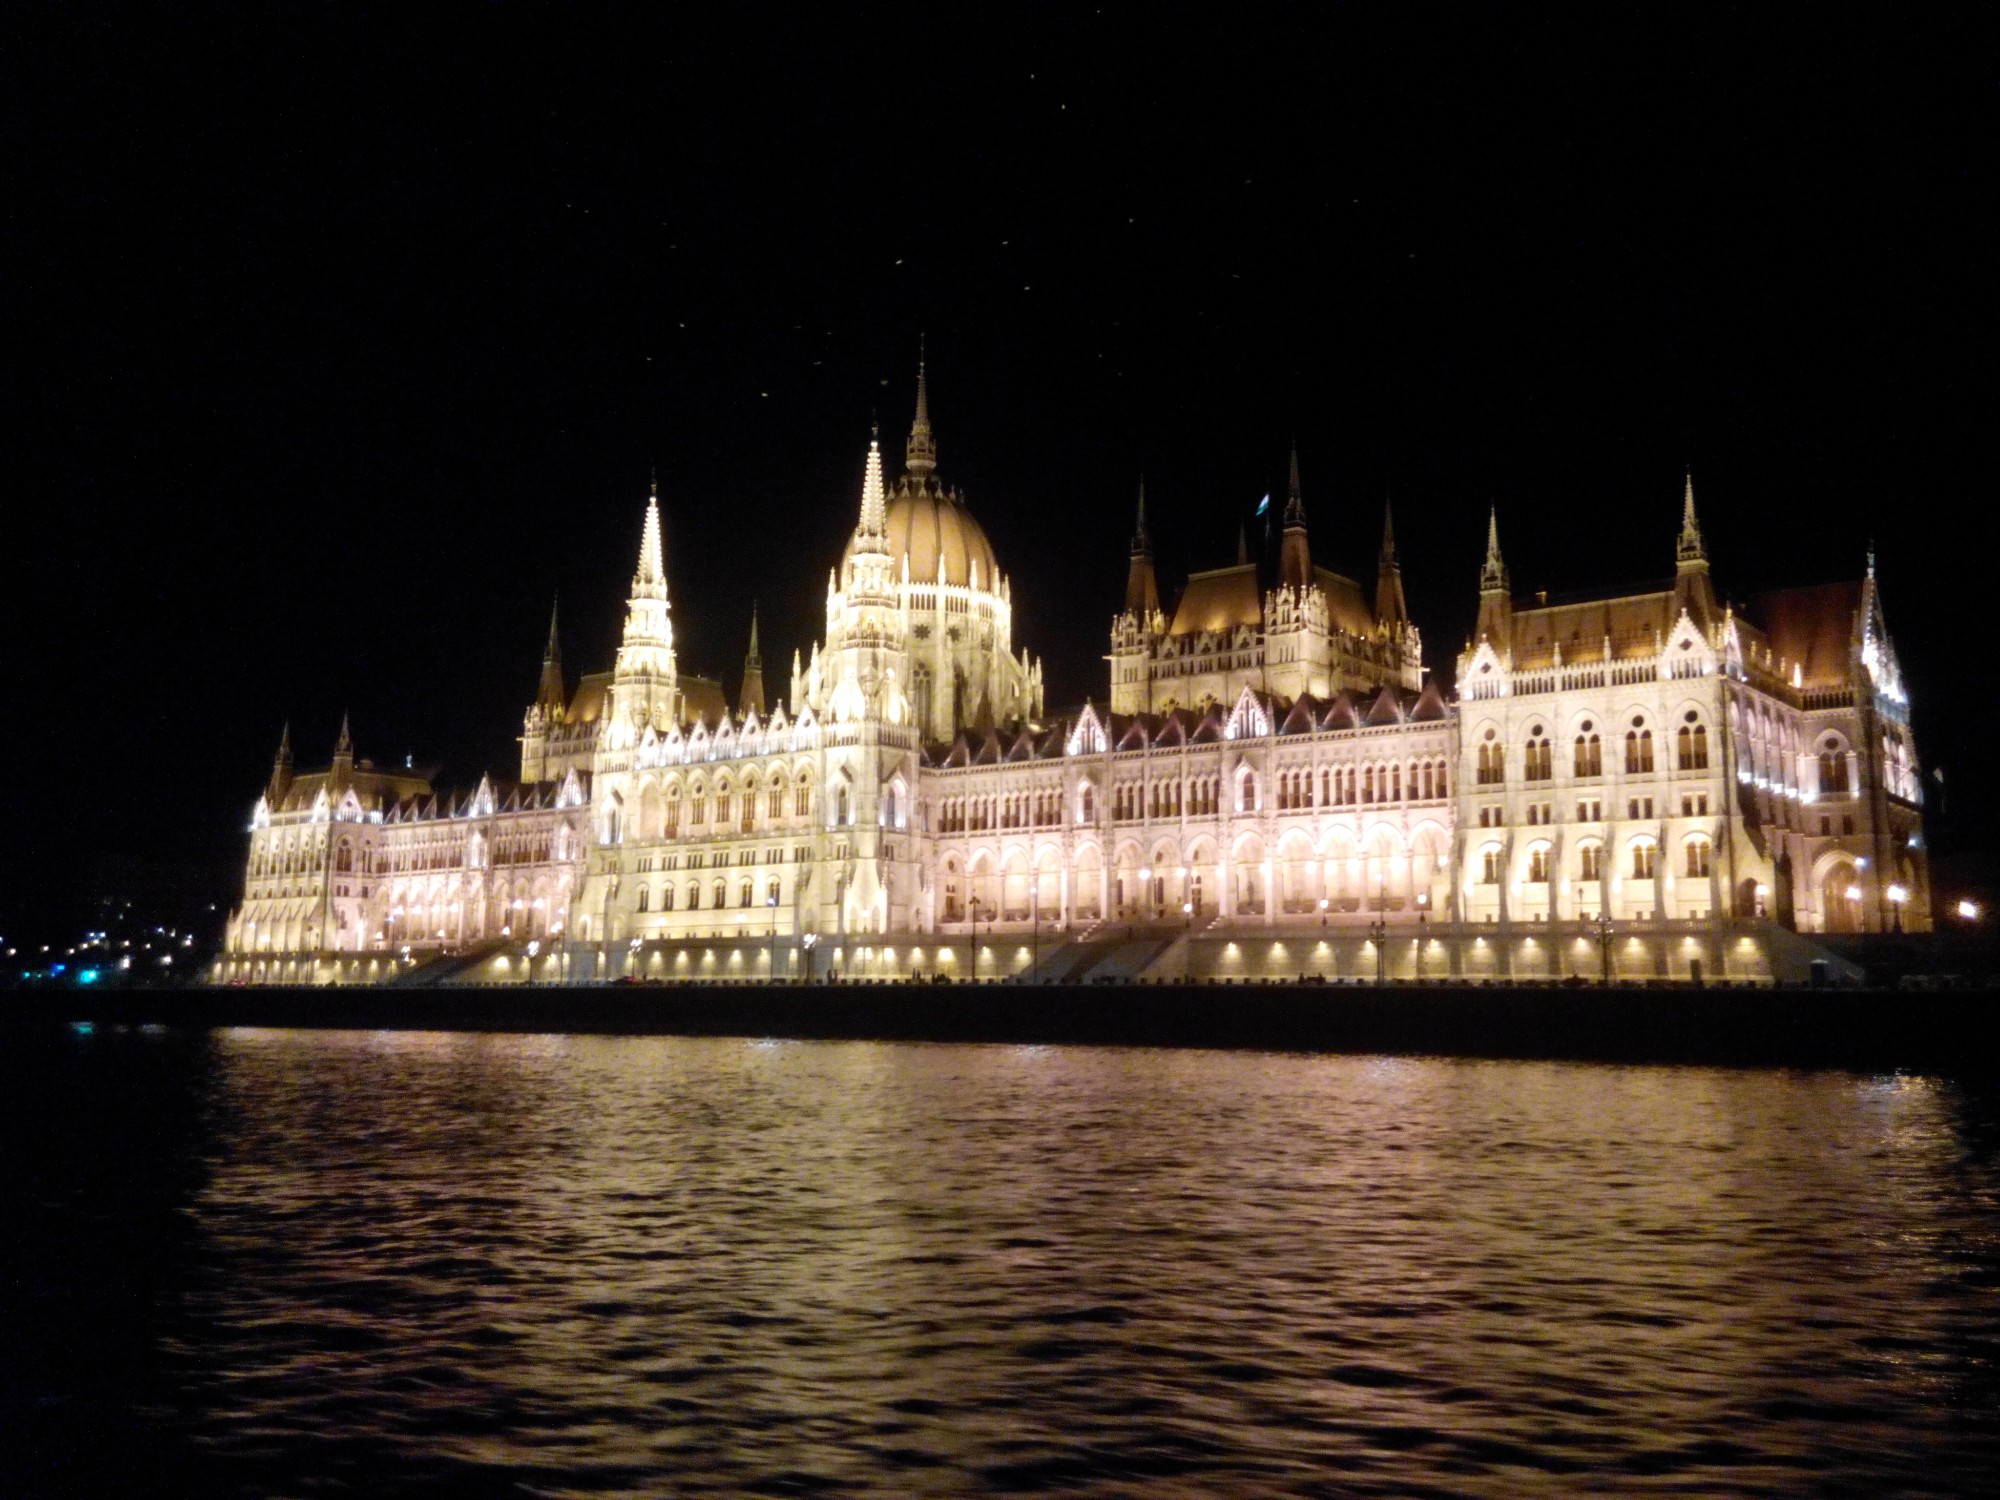 Budapest Parliament from the Danube<br/> <br/>
August 2015